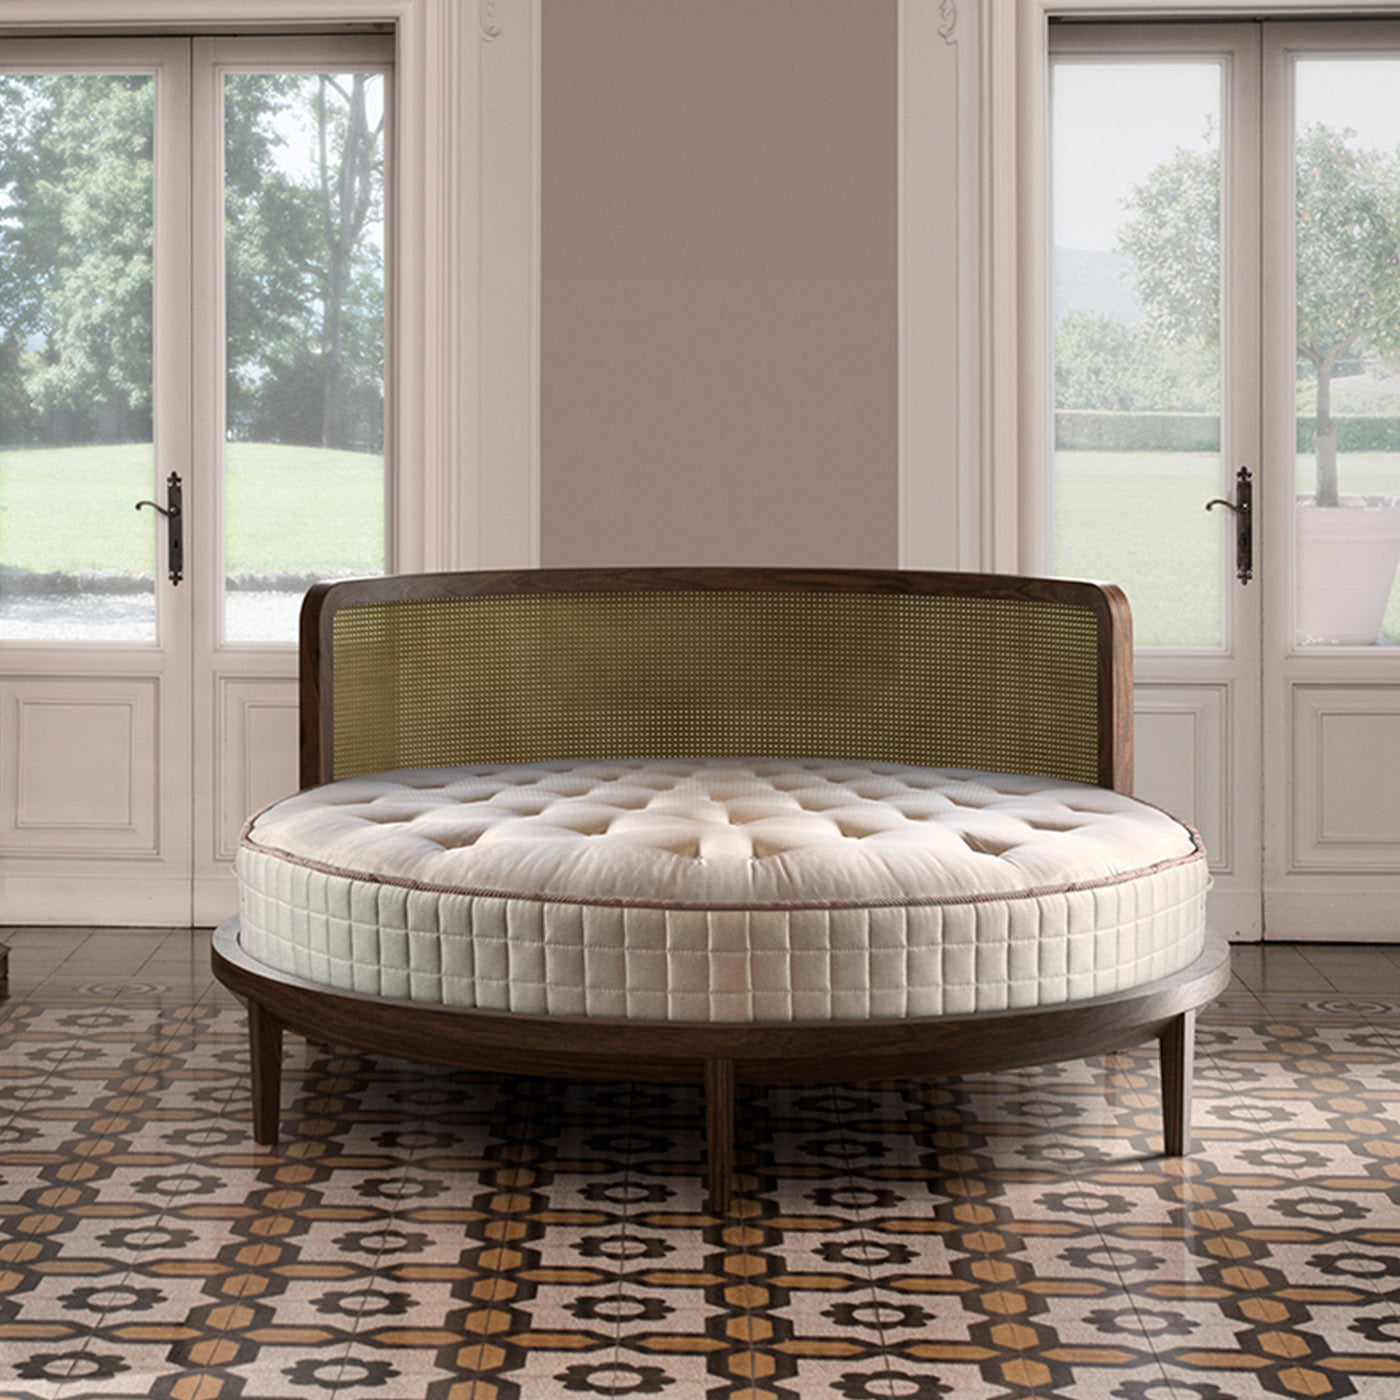 Giotto Round Bed - Alternative view 2